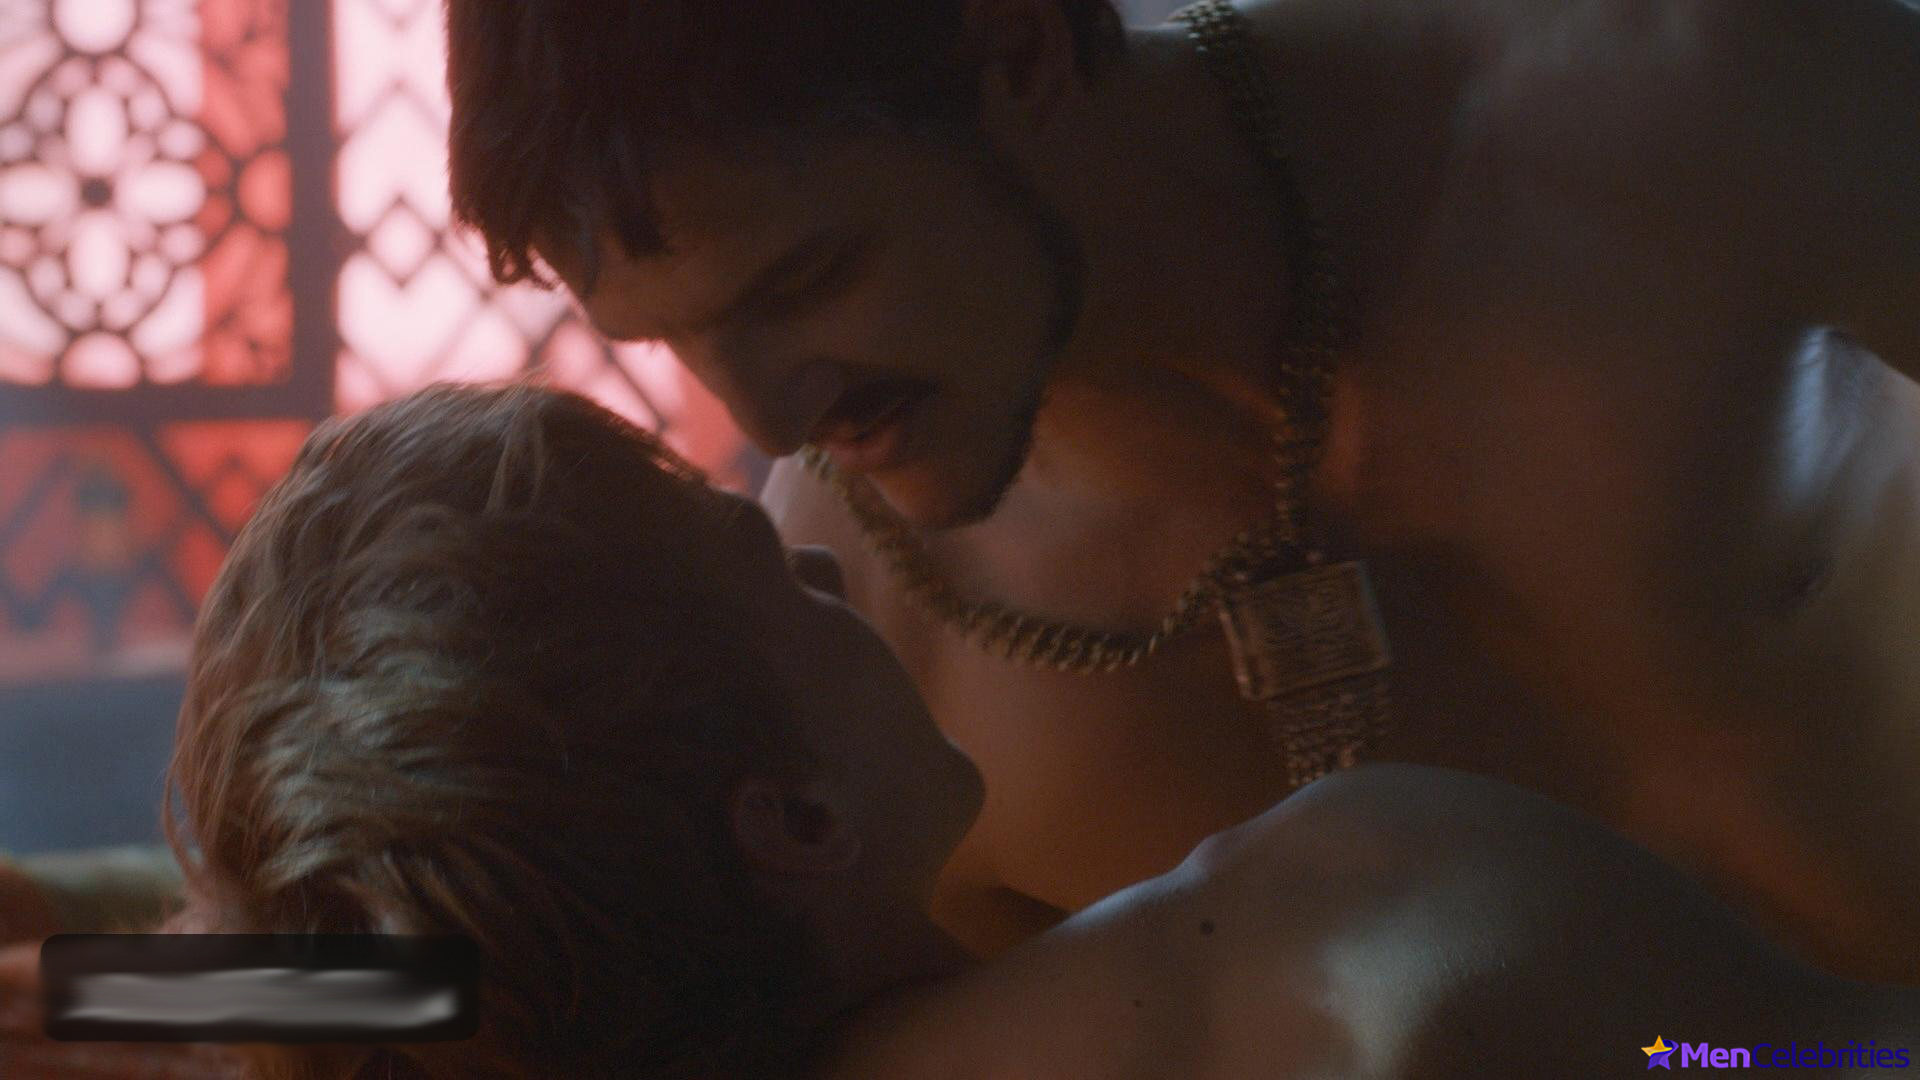 I mentioned earlier that Pedro Pascal is filmed in nude and sex movie scene...